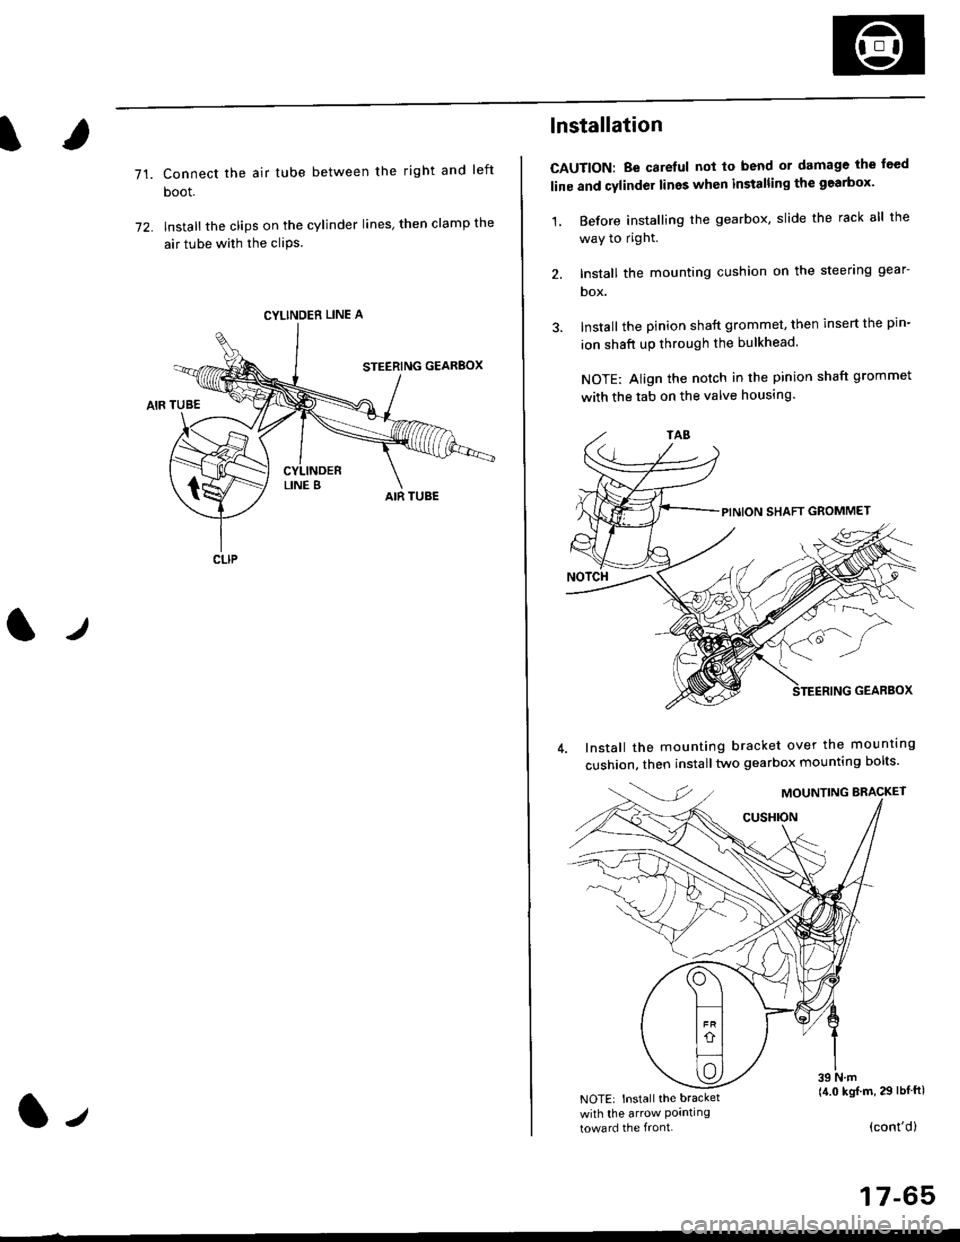 HONDA CIVIC 1998 6.G Service Manual 71.Connect the air tube between the right and left
boot.
lnstall the clips on the cylinder lines then clamp the
air tube with the cliPs.
l./
CYLINDER LINE A
CLIP
l-,
lnstallation
CAUTION: Be carelul 